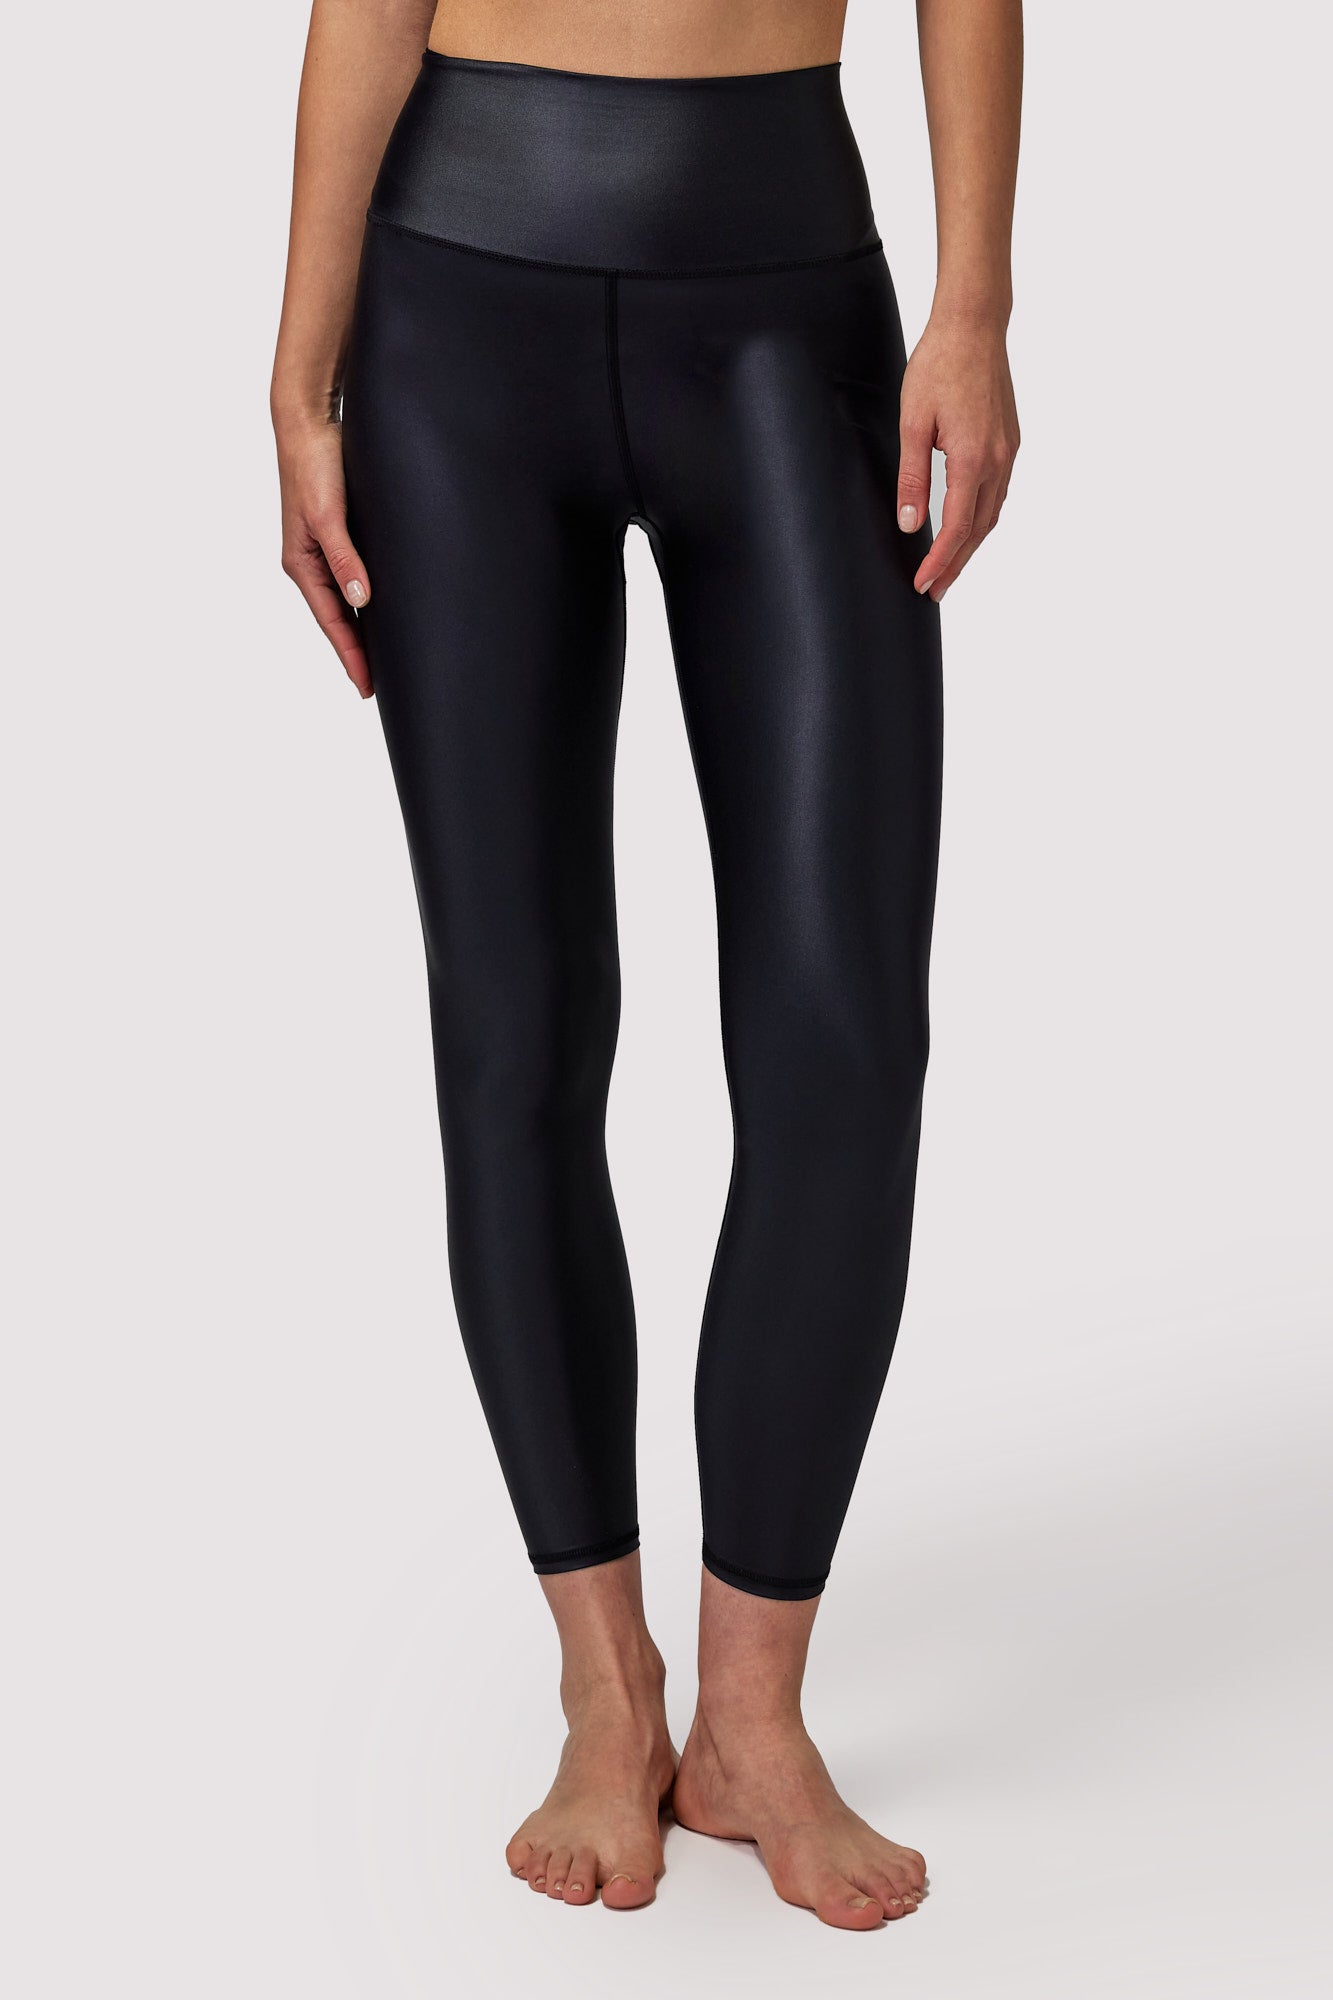 Snatched Leather Leggings – ahlie